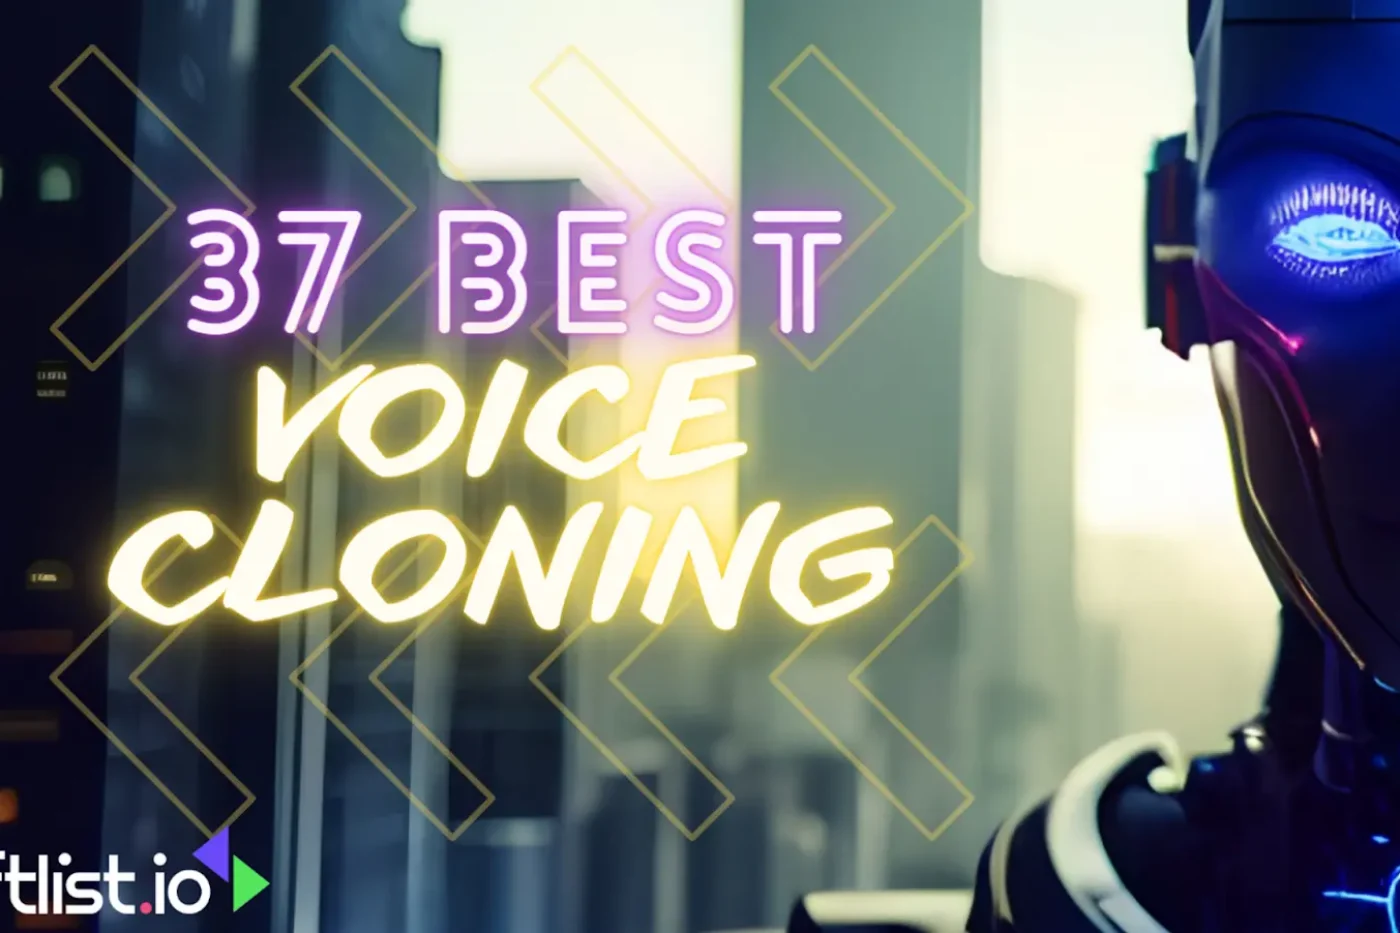 Discover the Top 37 Voice Cloning Solutions for Your Needs